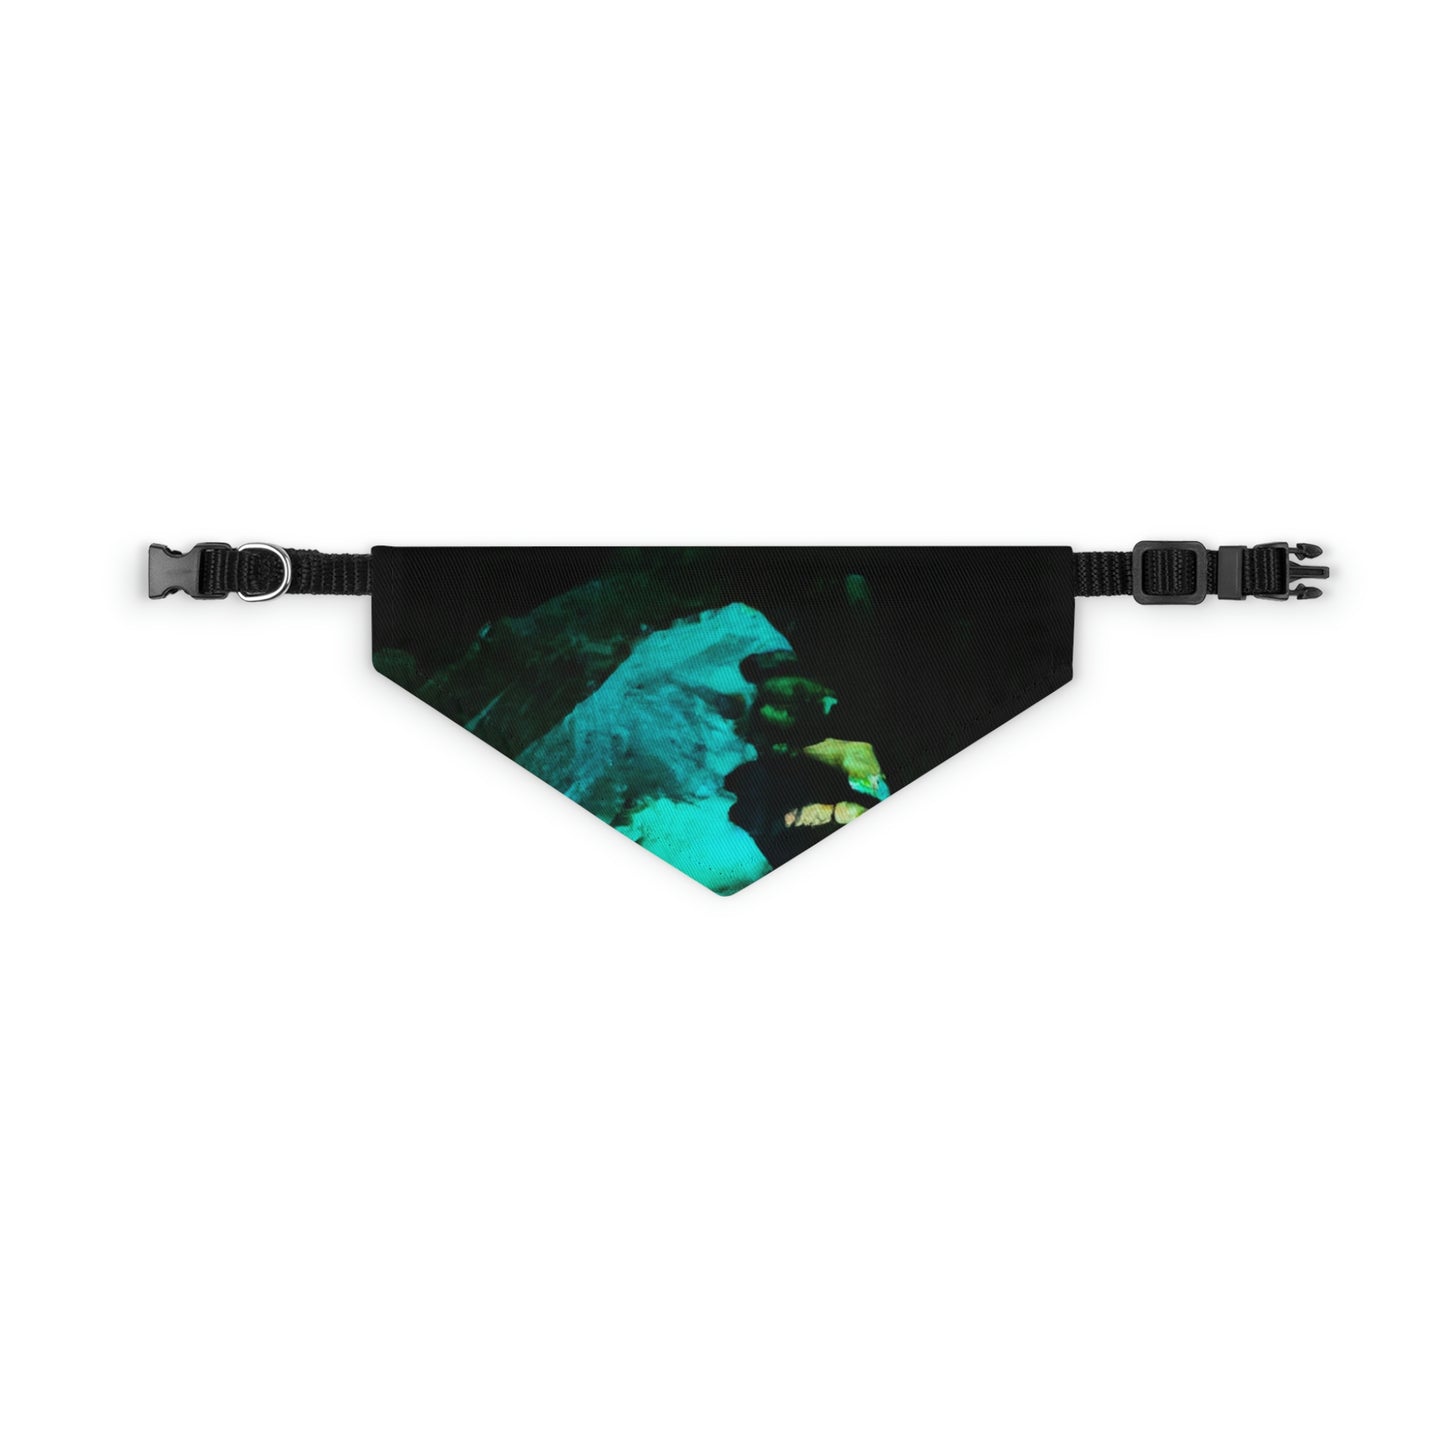 The Gleaming Relic of the Cave - The Alien Pet Bandana Collar